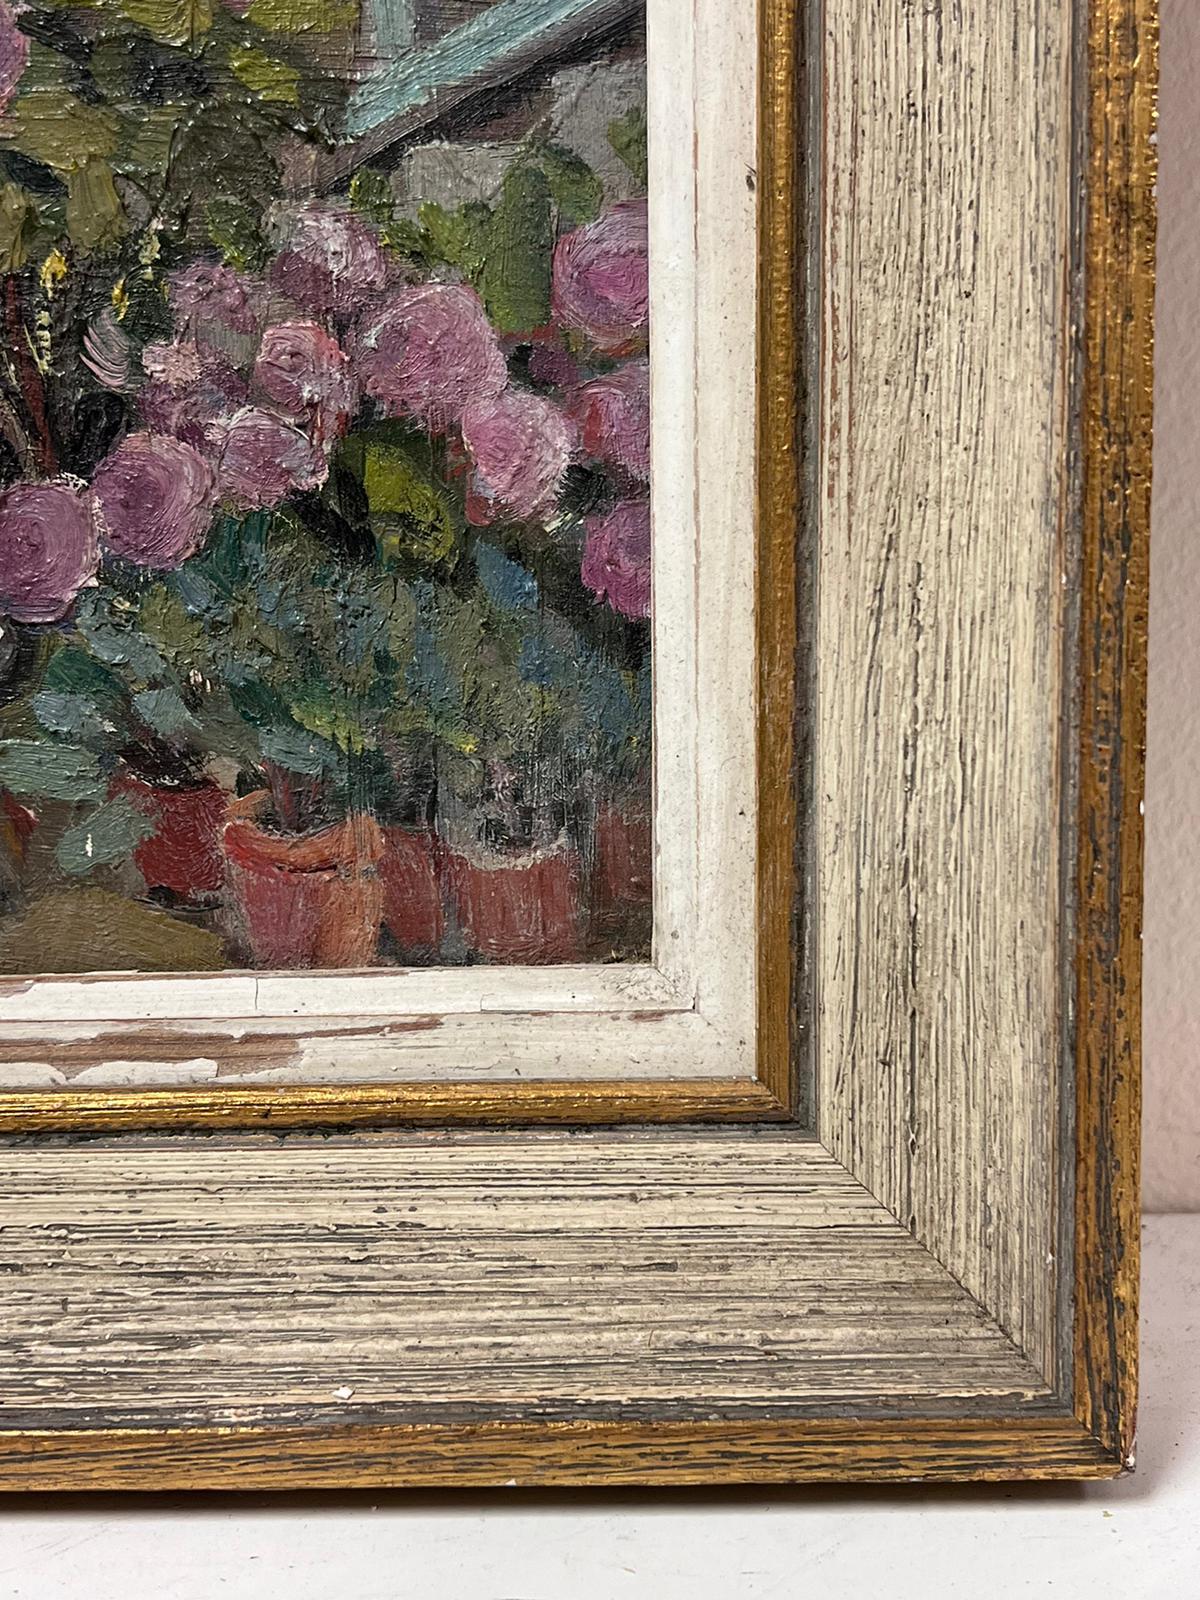 The Flower Garden
by Louise Alix (French, 1888-1980) *see notes below
provenance stamp to the back 
oil painting on board, framed
framed: 11.5 high by 13.5 inches wide
painting: 8 x 9.5 inches
condition: overall very good and sound, a few scuffs and